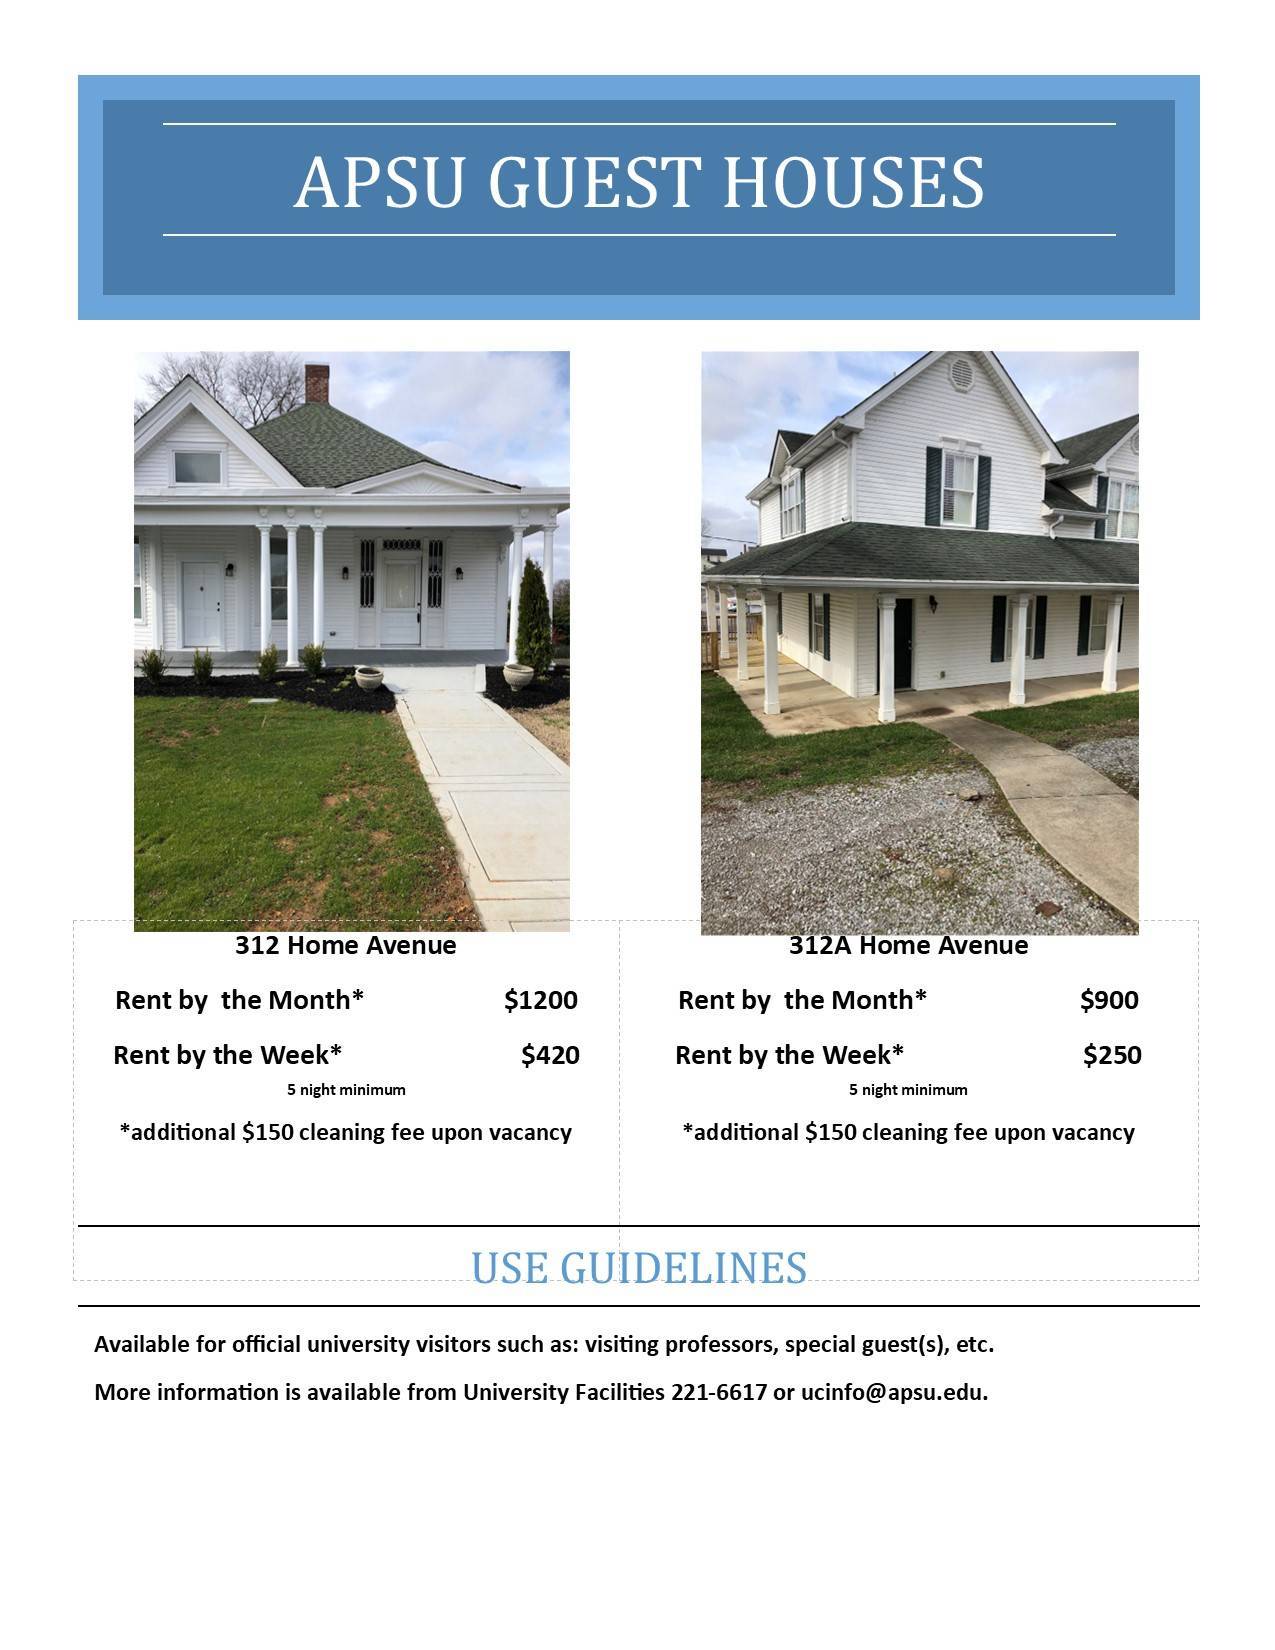 Picture of Austin Peays two guest houses with pricing information